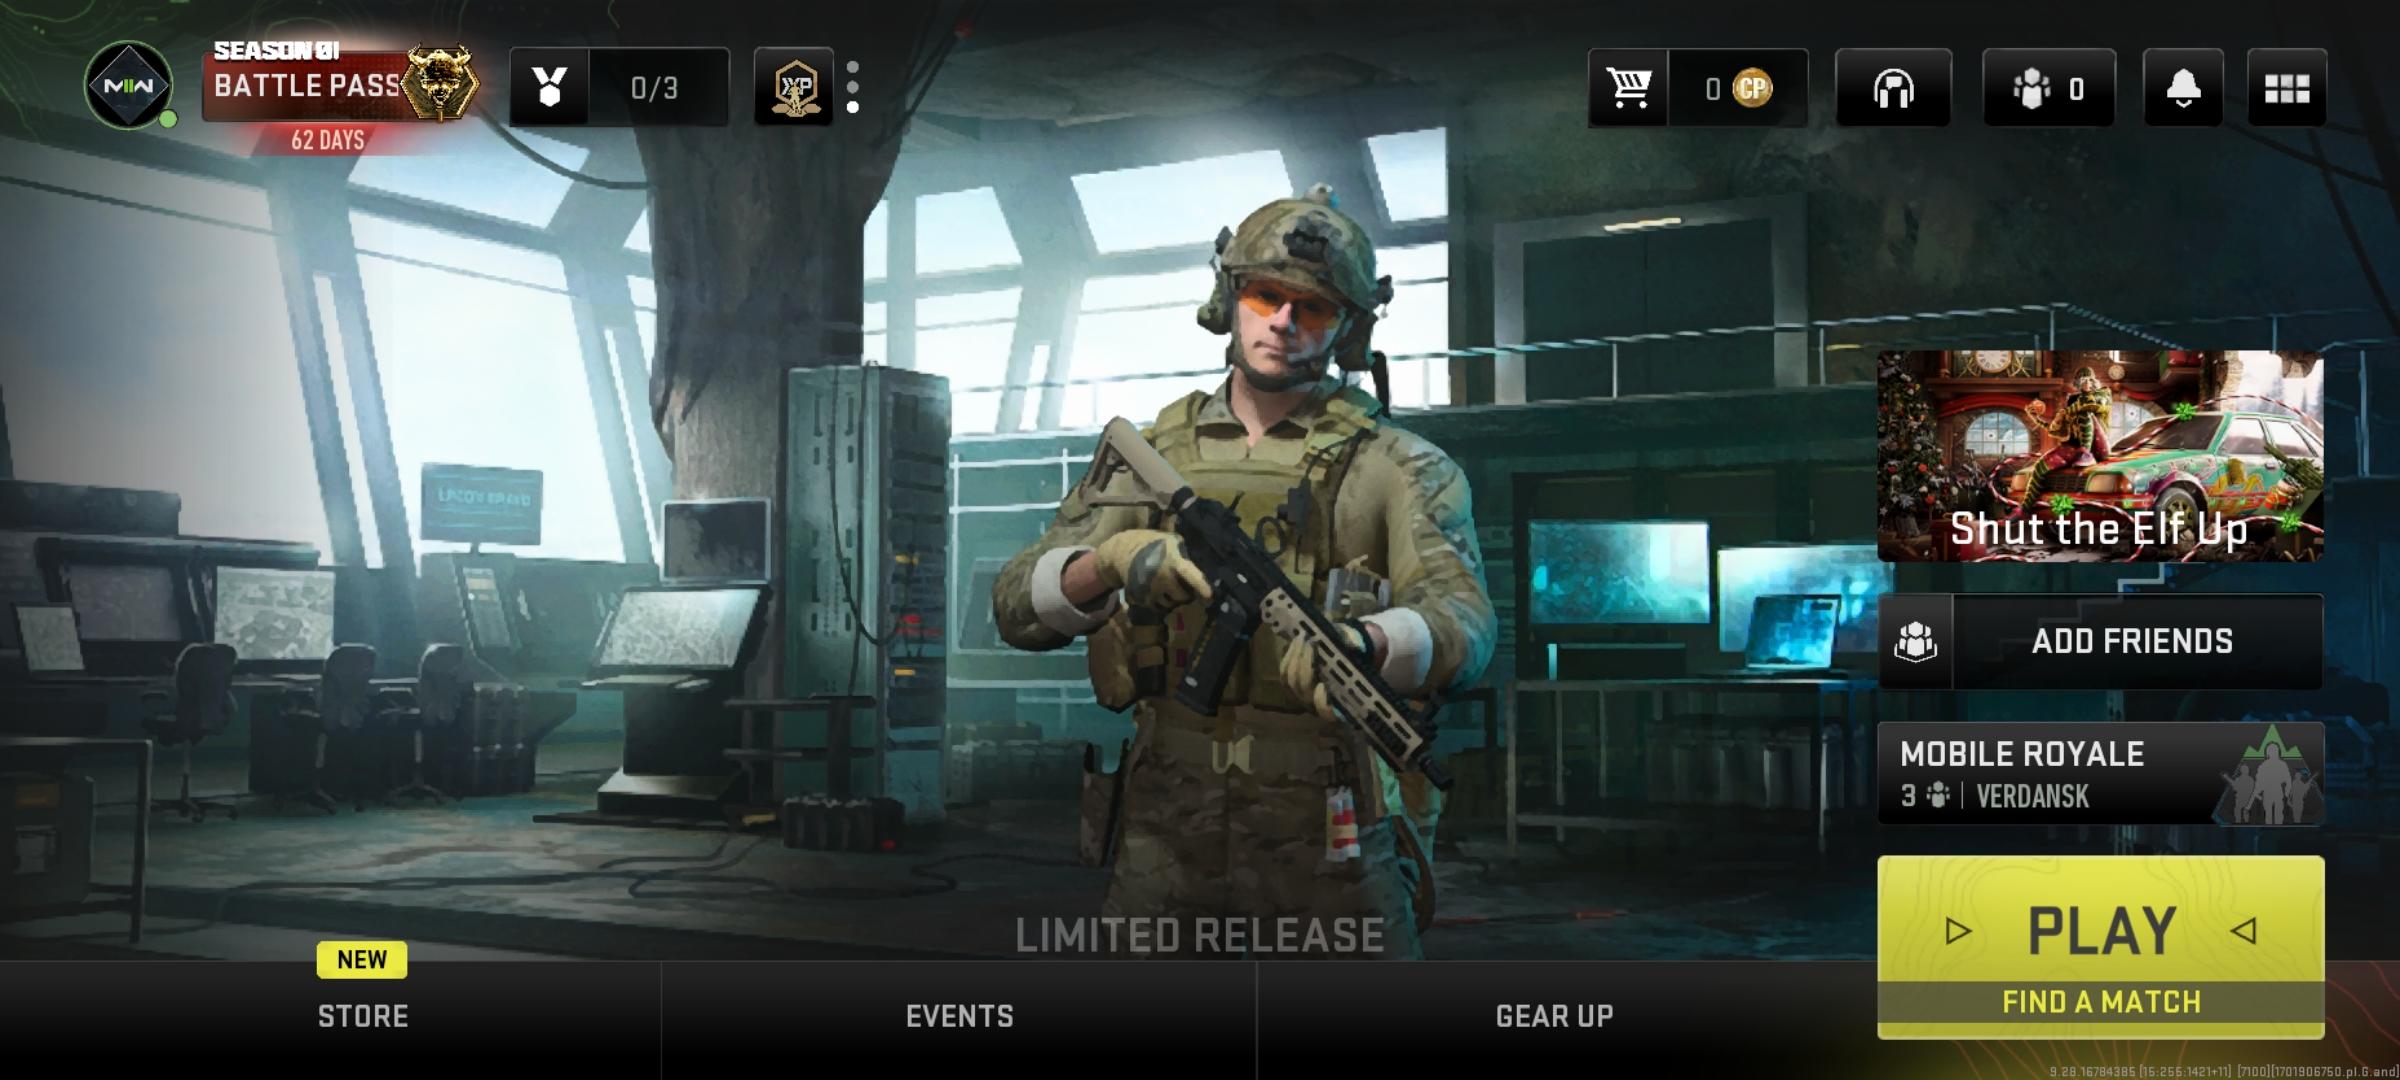 Call of Duty: Warzone Mobile Fascinating Free Pre-Registration Rewards